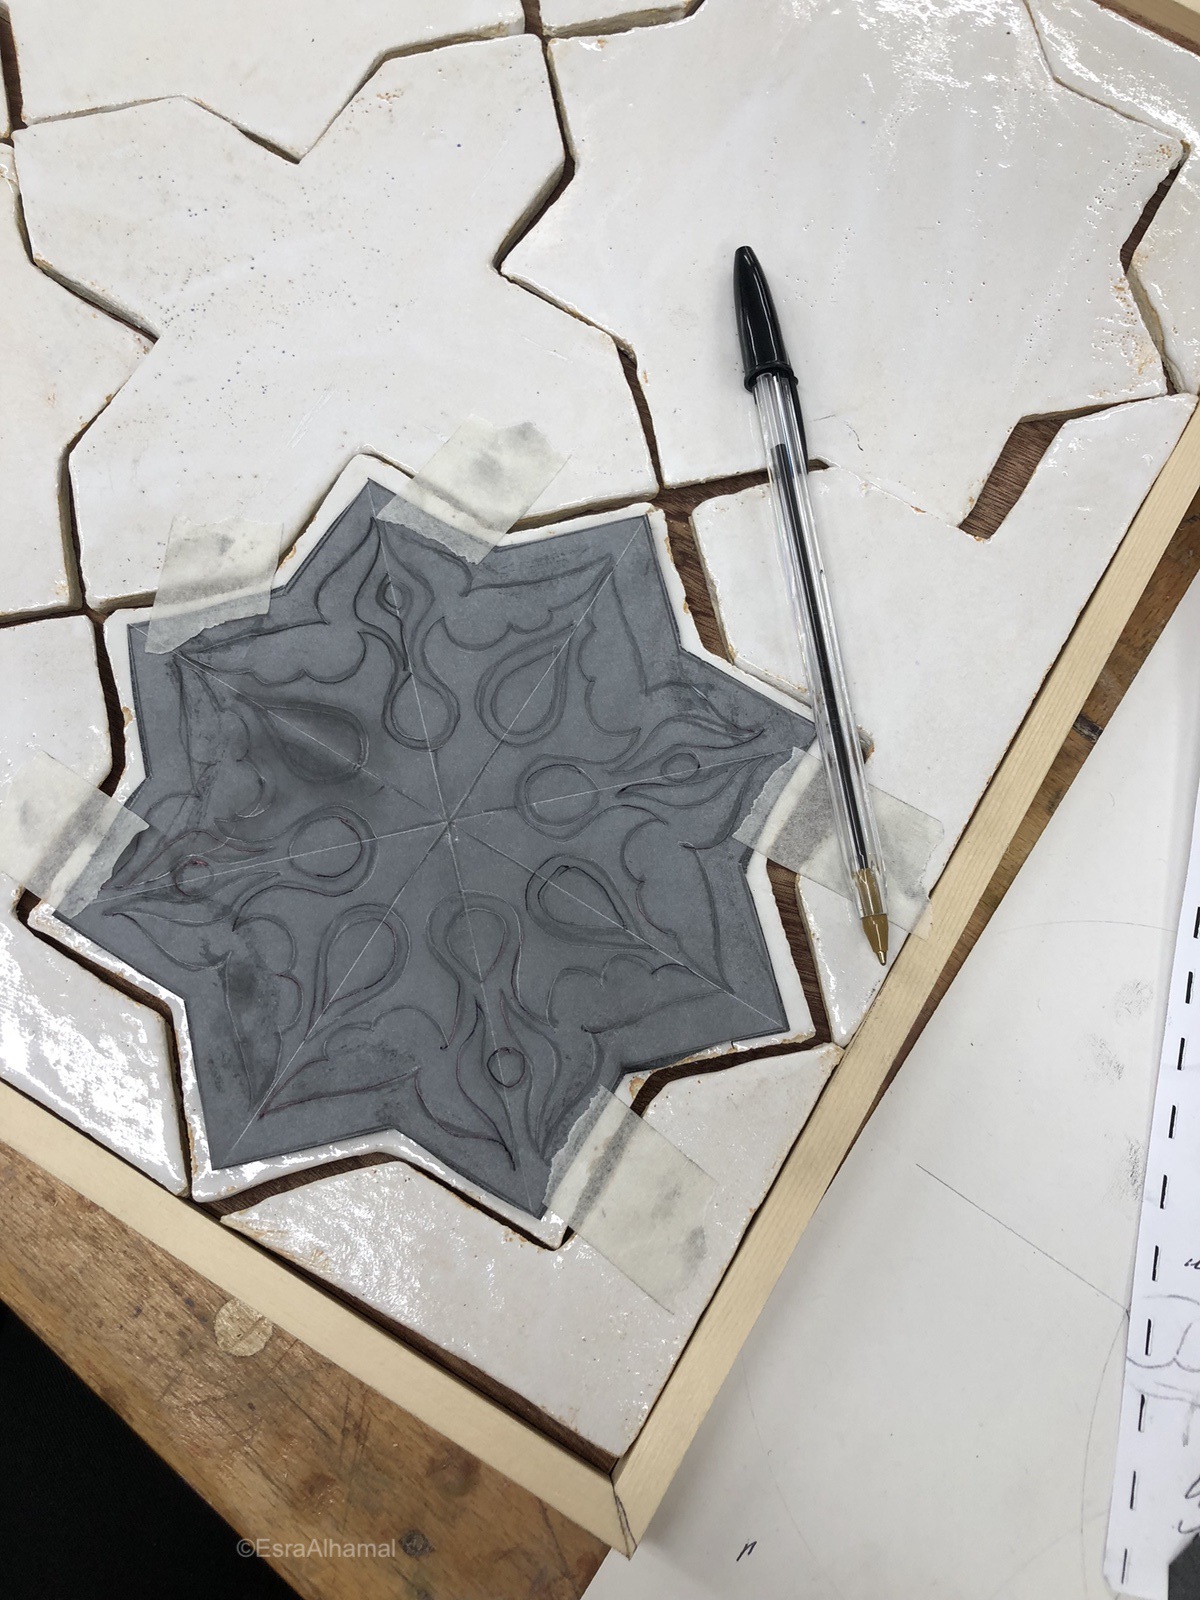 Transferring Design from paper to tile 